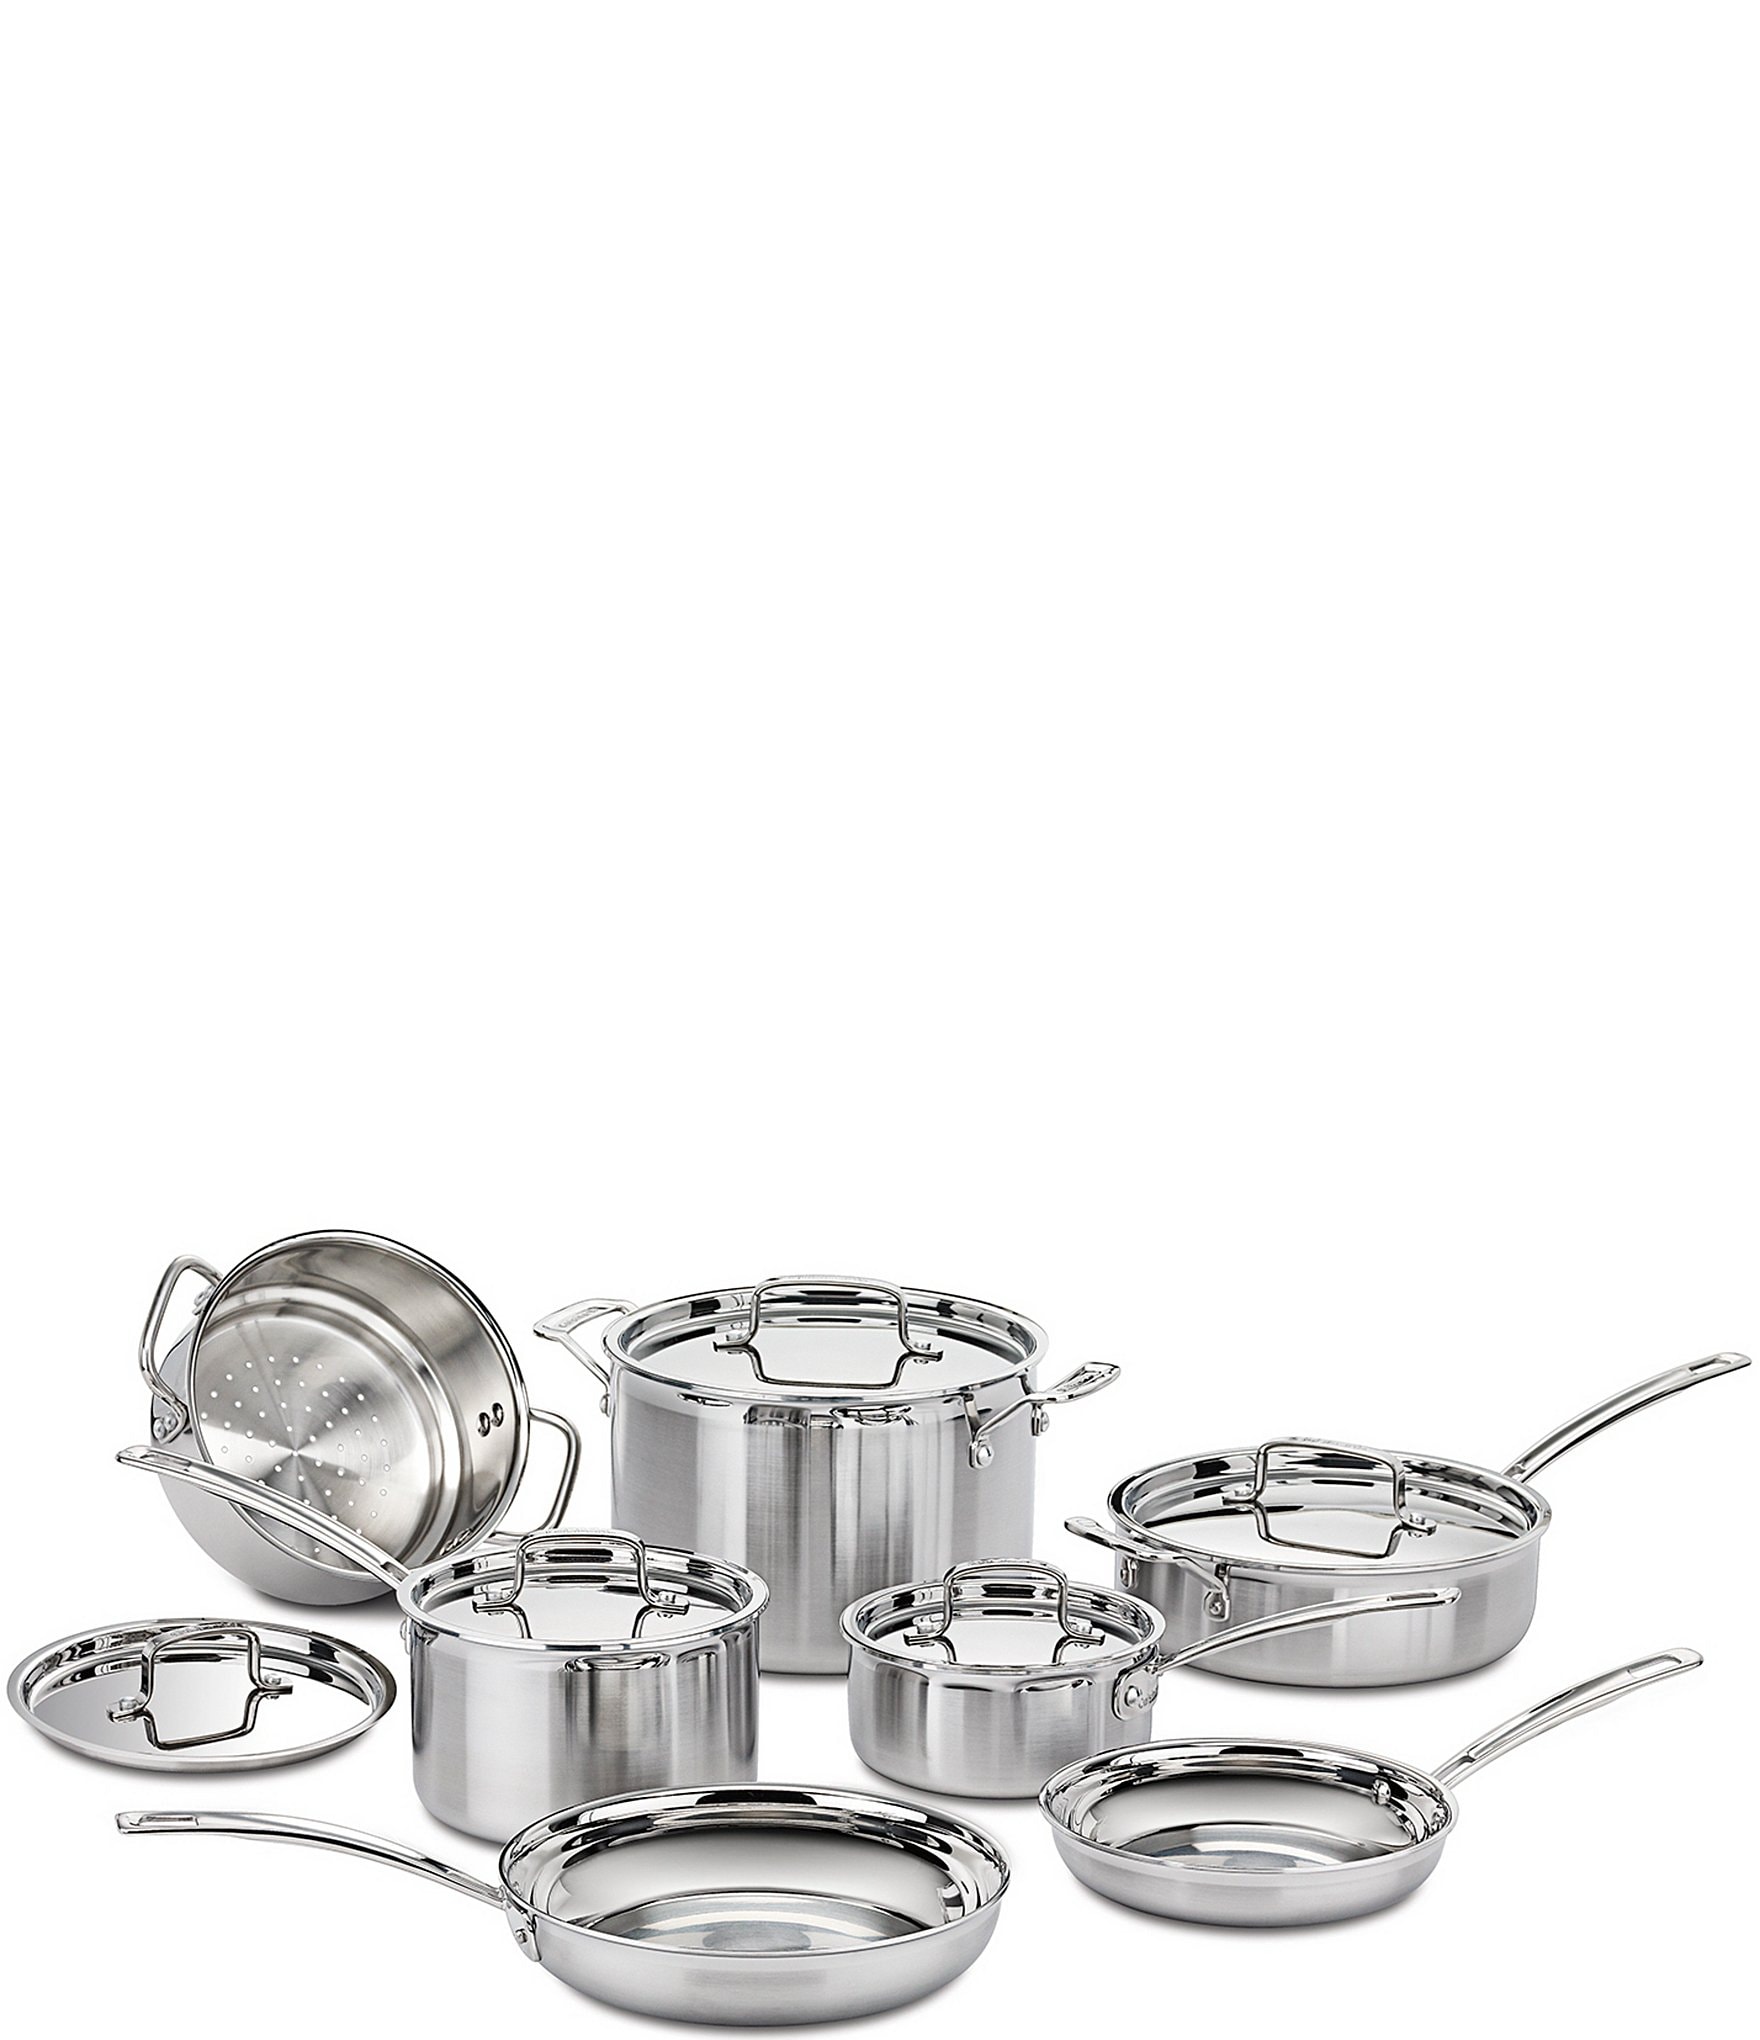 Cuisinart MultiClad Pro Stainless 6-Quart Saucepot with Cover